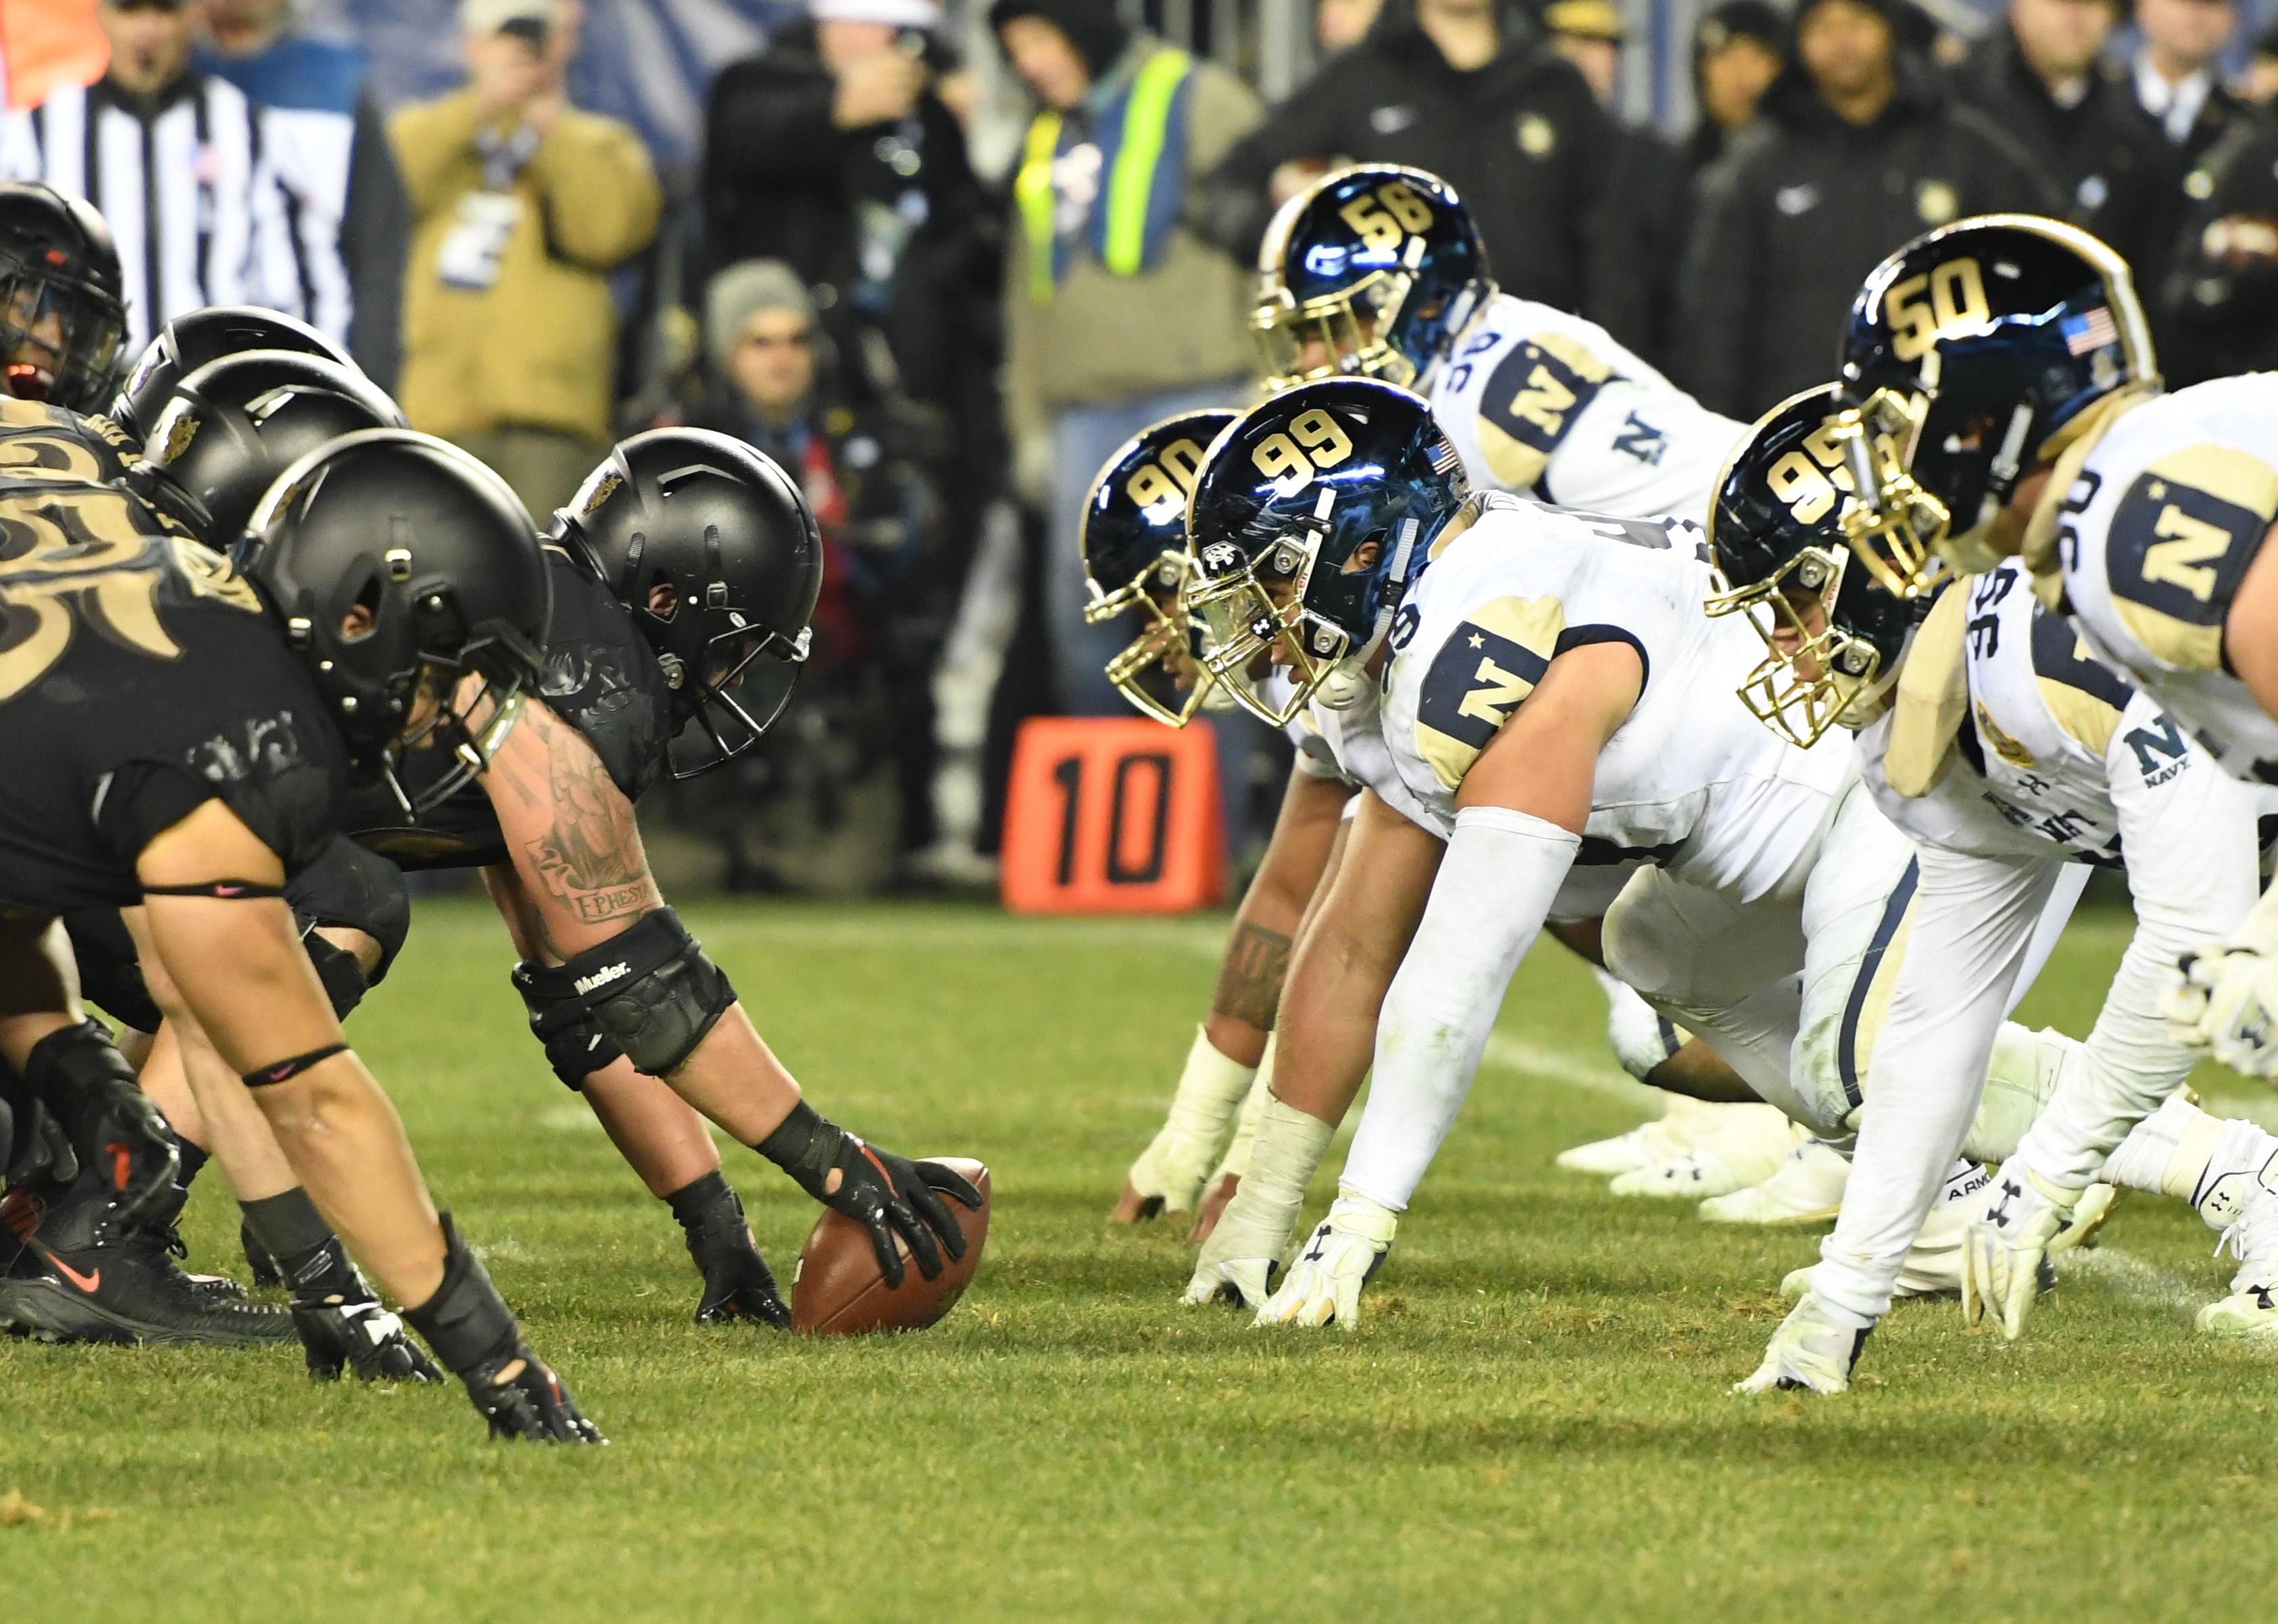 Army prepares to snap the ball against Navy during the Army-Navy game.